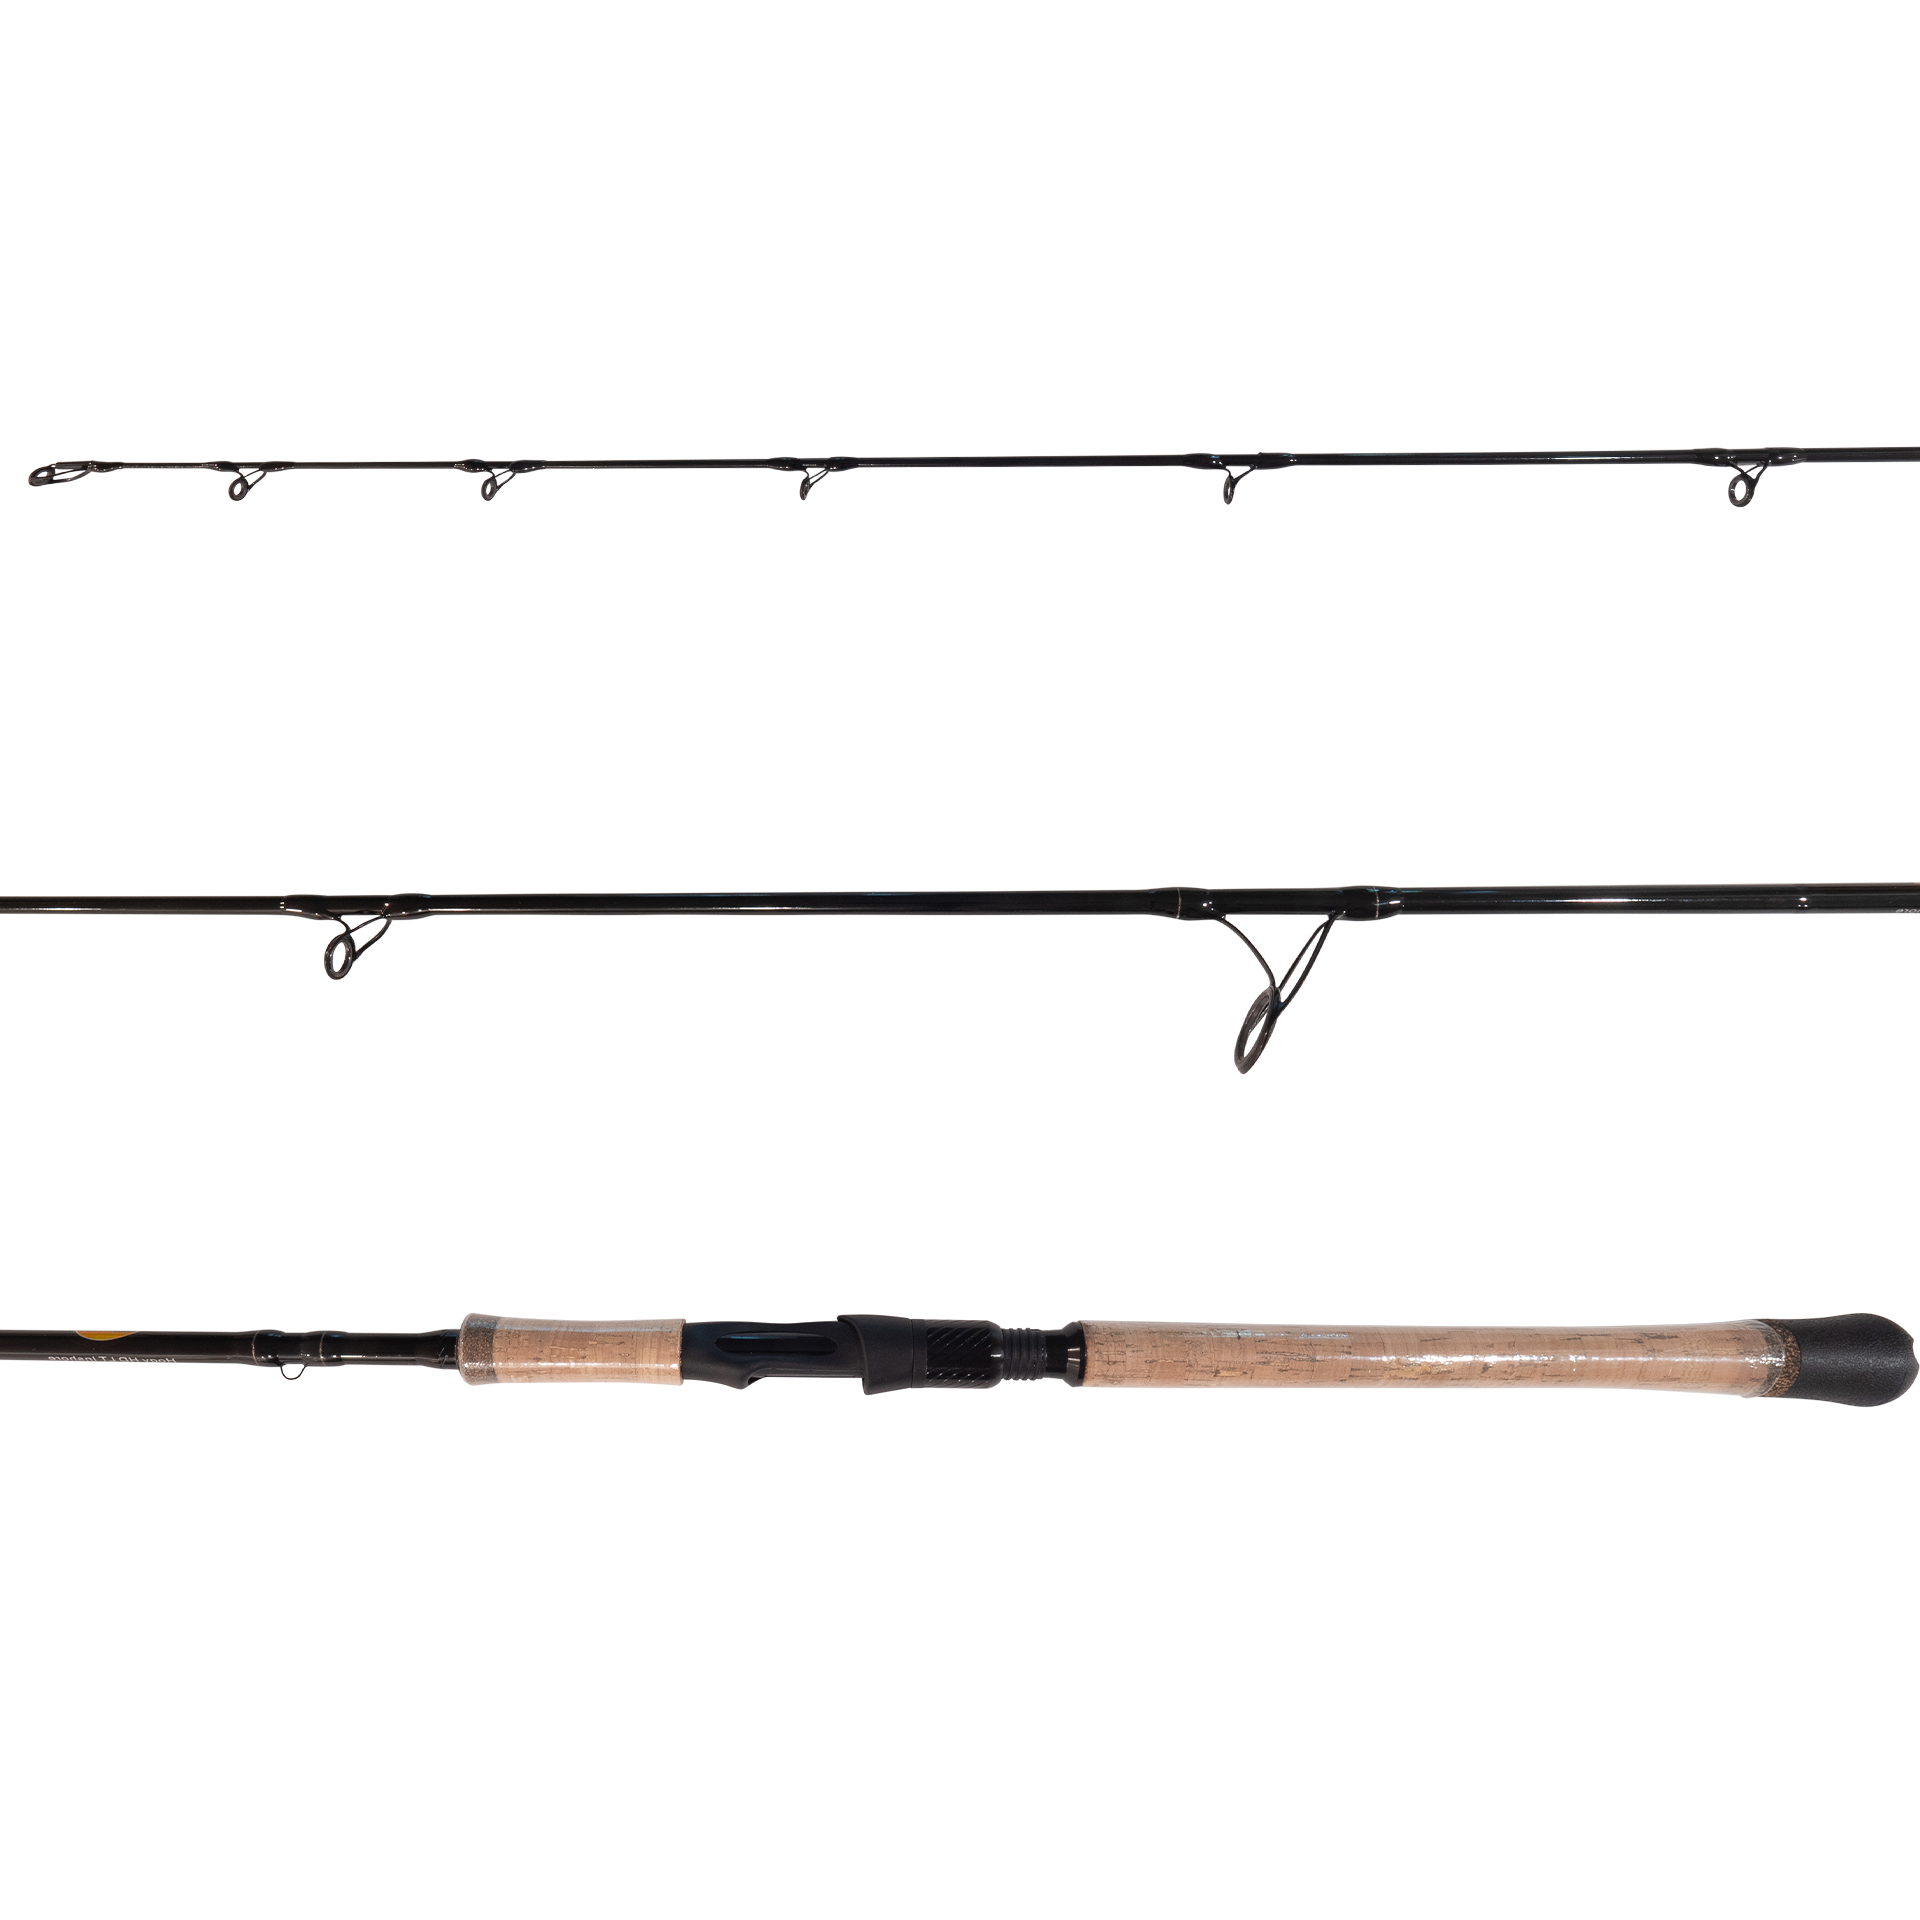 Inshore Spinning Rod: Mod-Fast Action 7' MH (3/4oz - 3oz)